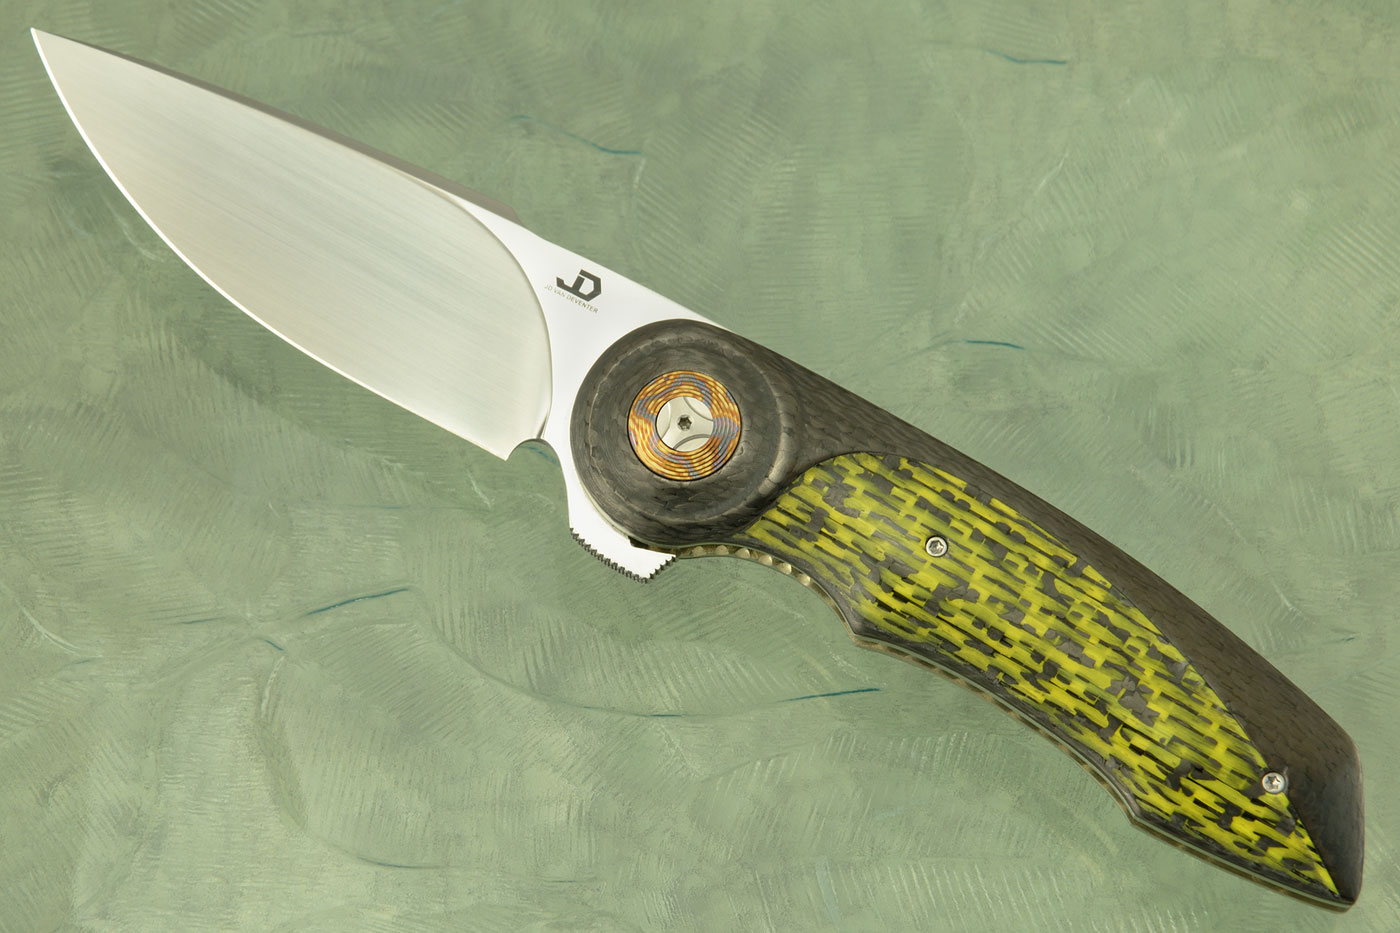 Gold Midi Flipper with Black and Yellow Carbon Fiber (IKBS) - CTS-XHP